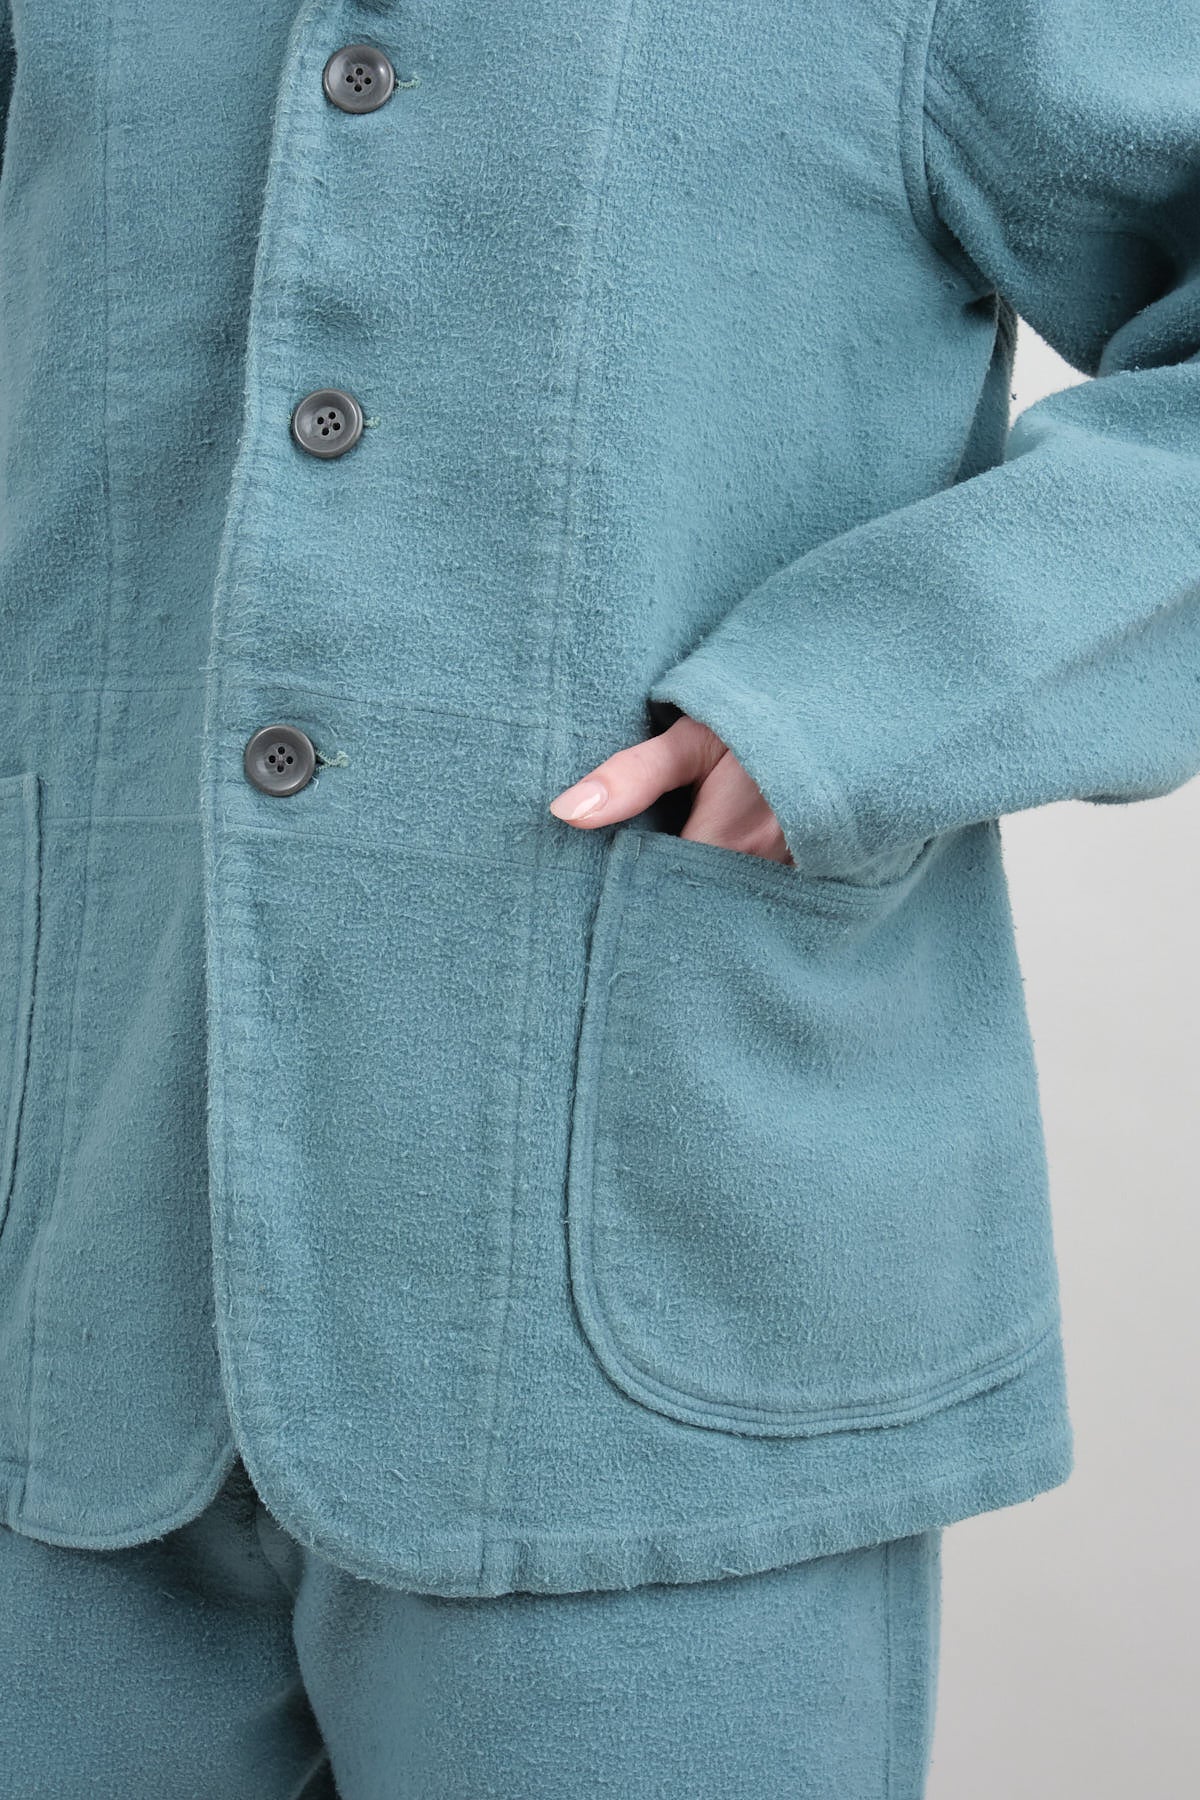 Kapital Hospital Jacket in Turquoise with Patch Pockets